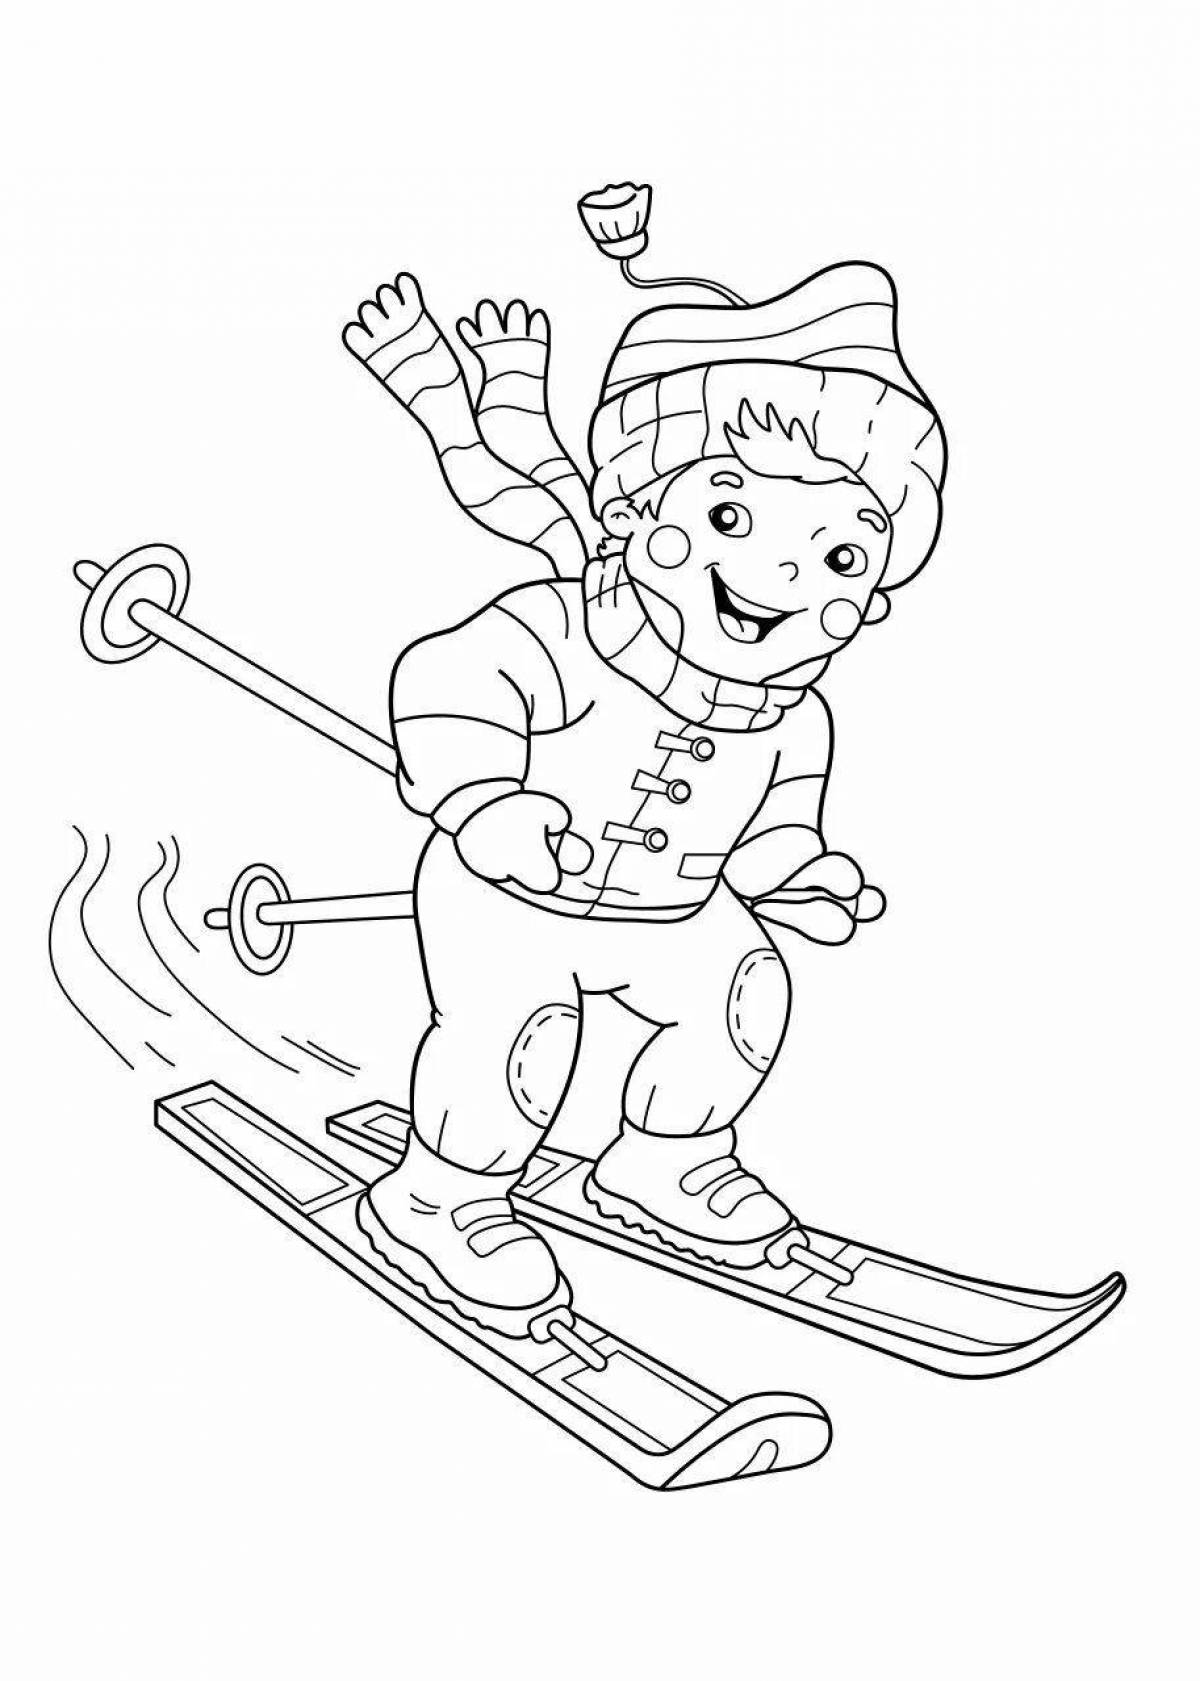 Coloring book exotic skiing